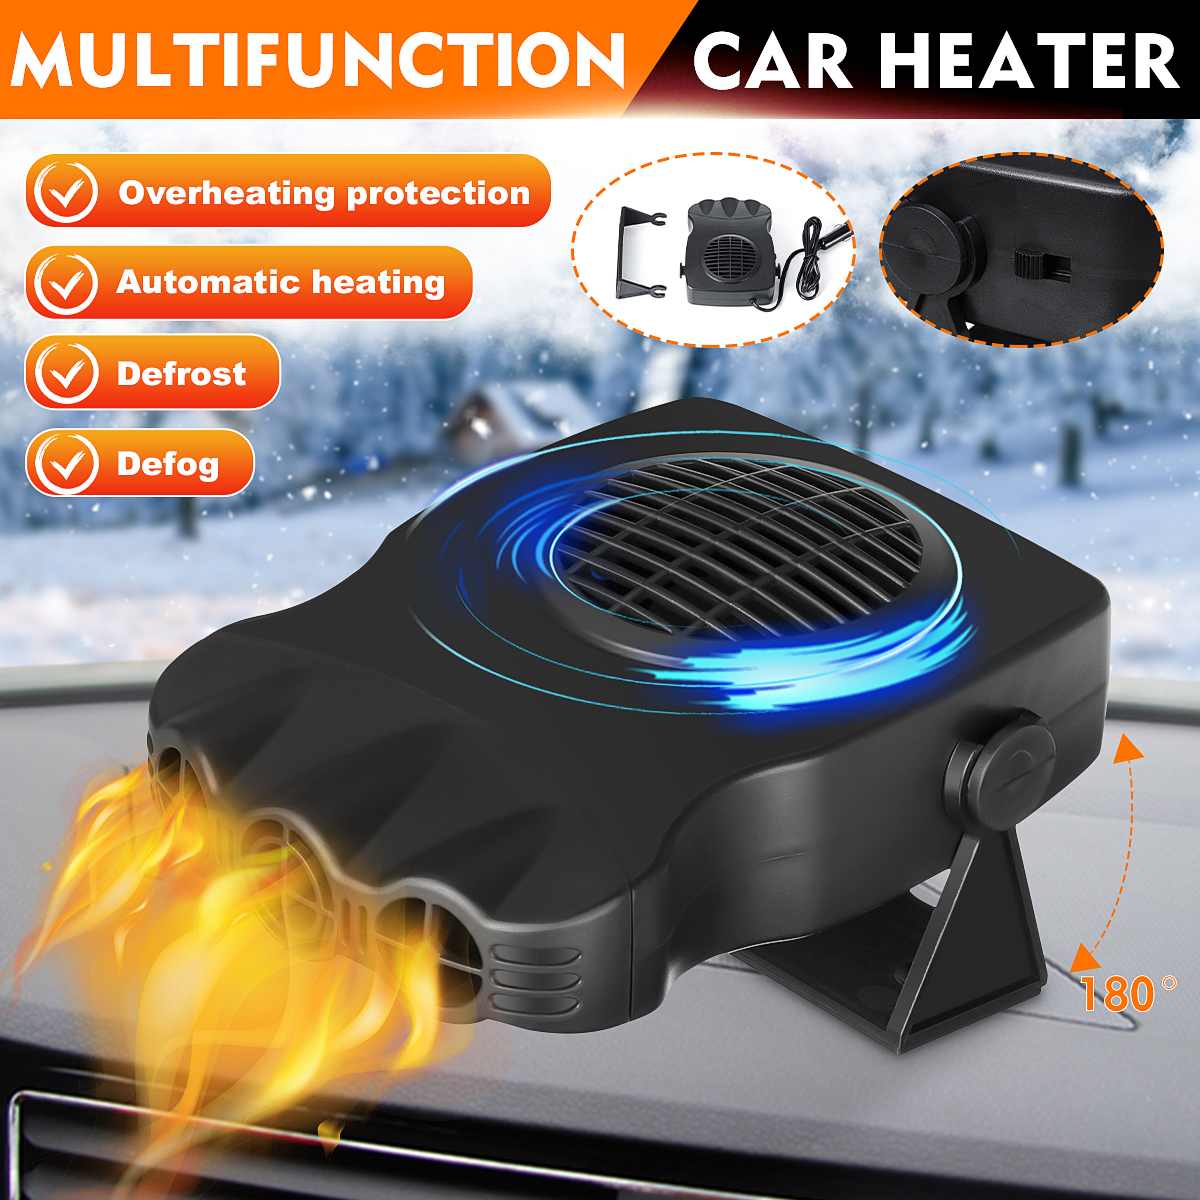 300W Car hearter 2 In 1 Auto Car Heater 12/24V Heating Fan With Swing-out Handle car interior Portable electric heater defroster